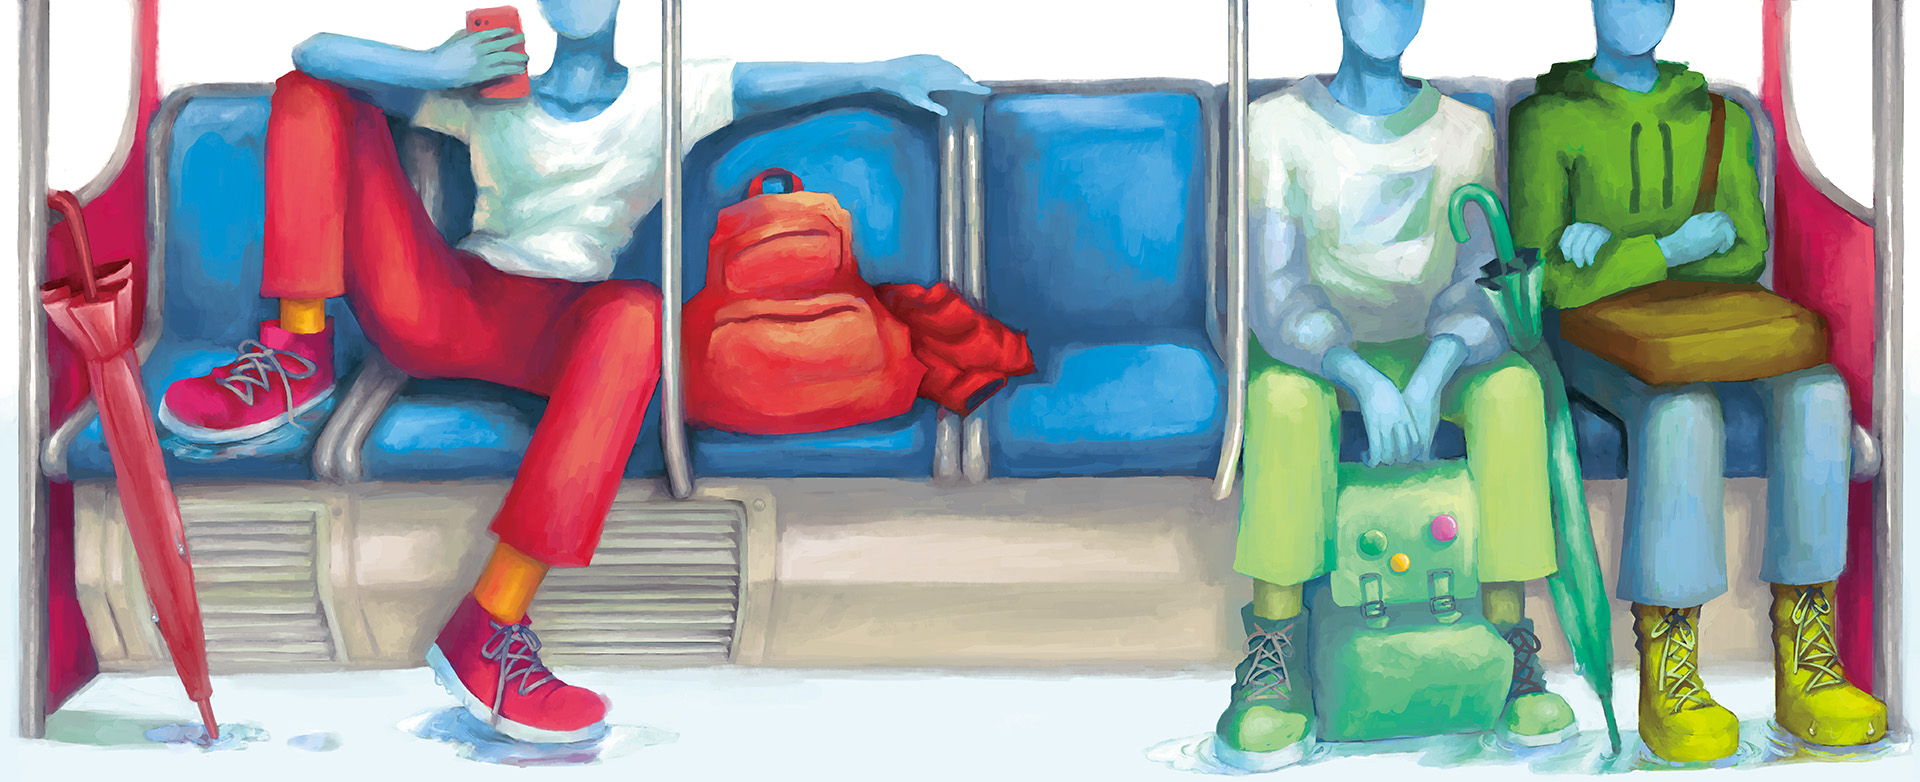 Illustration showing a SkyTrain customer with their feet and bags on the seat.